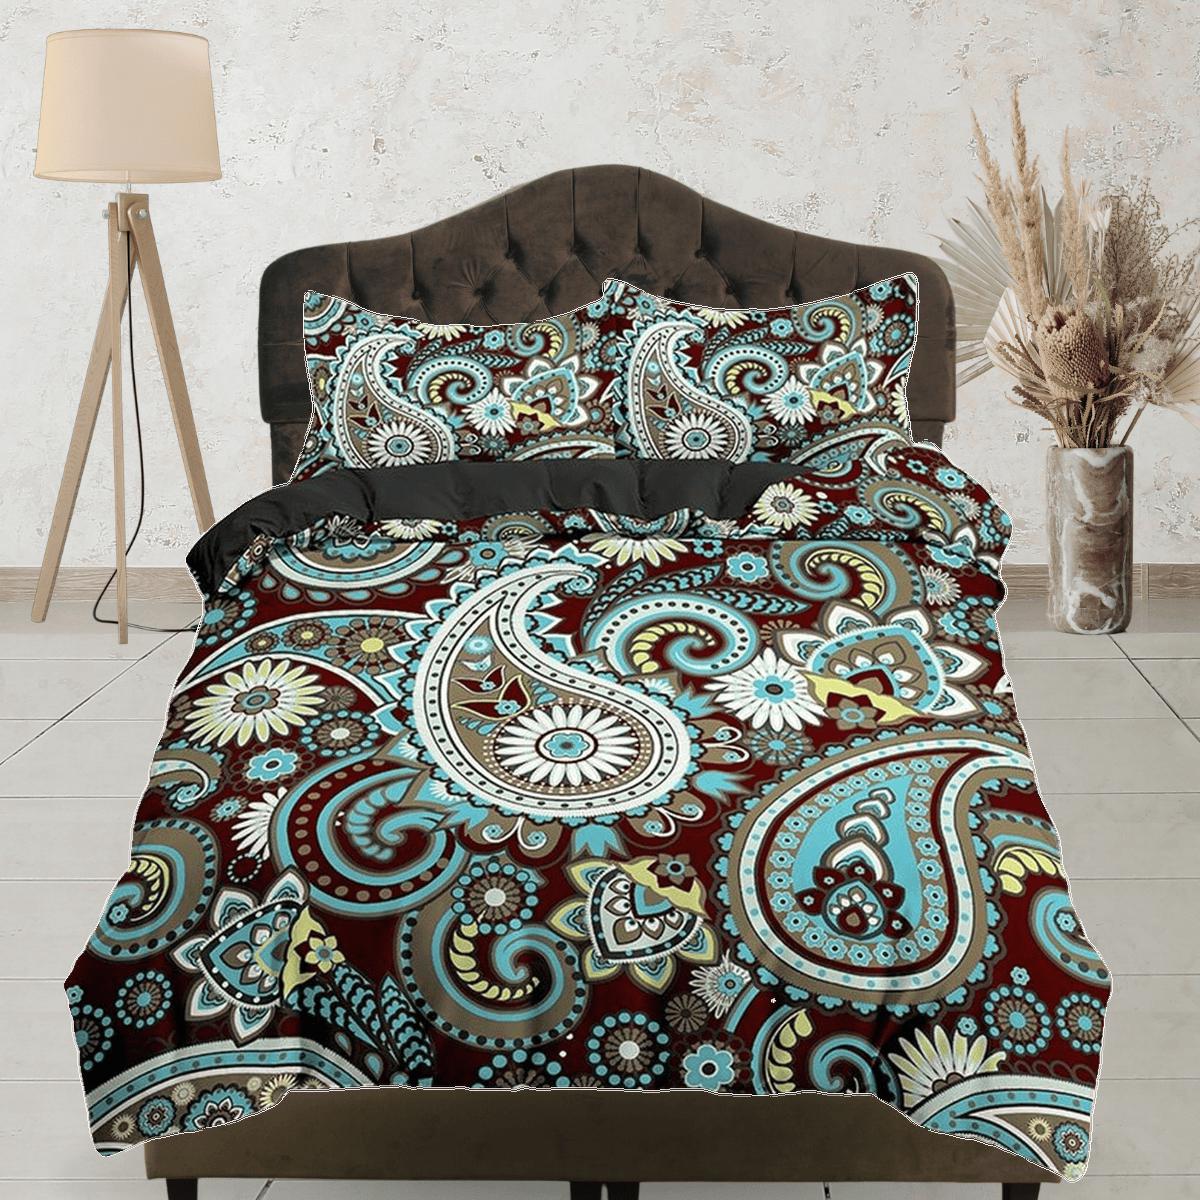 daintyduvet Colorful blue green paisley brown duvet cover set, aesthetic room decor bedding set full, king, queen size, abstract boho bedspread luxury